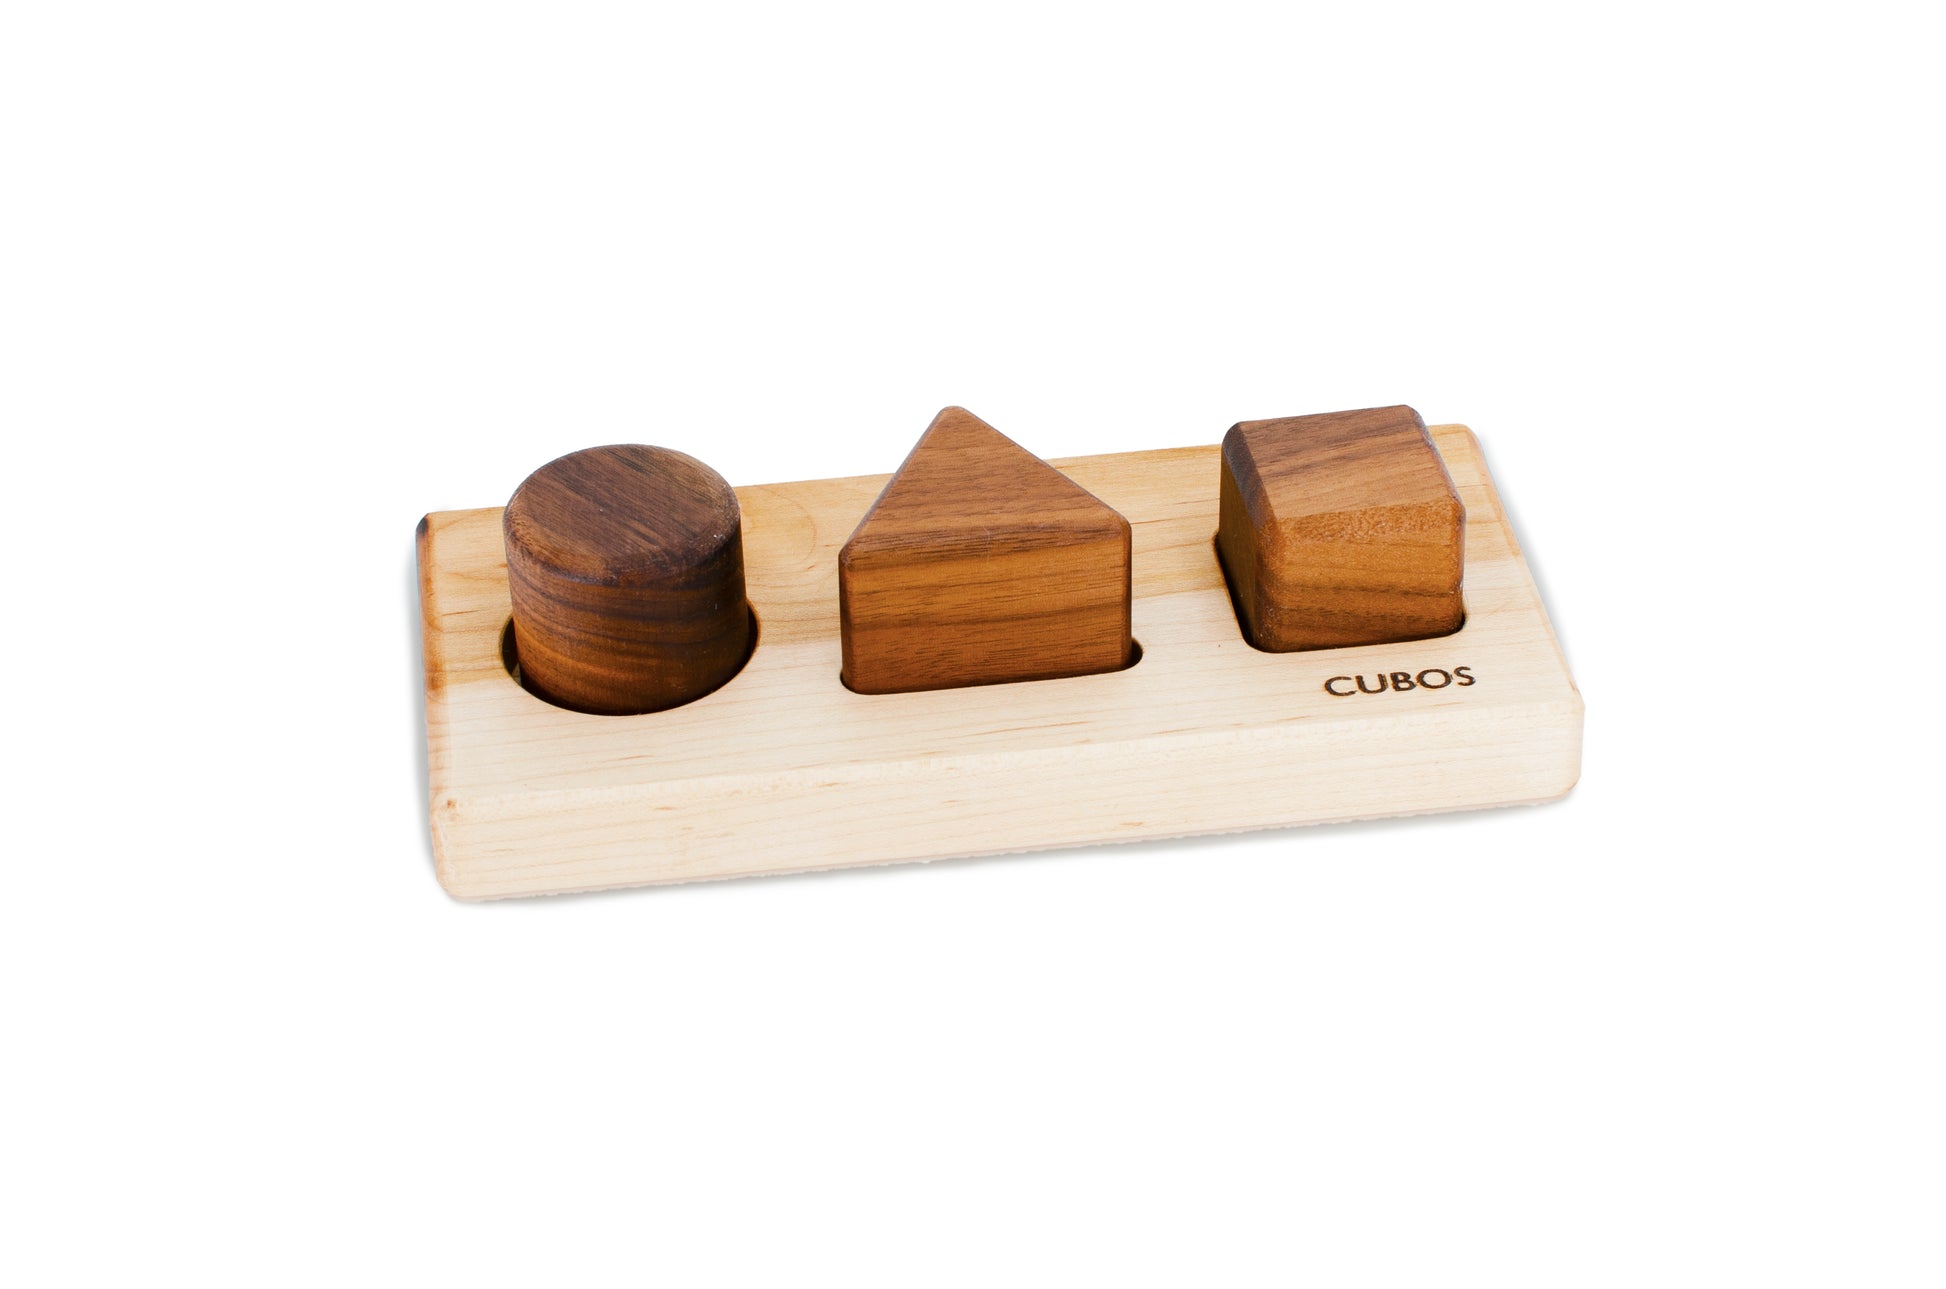 Cubos Basic - A wooden shape sorting toy with three fundamental shapes, offering a simplistic yet engaging design for shape recognition and fine motor skills development in Montessori education